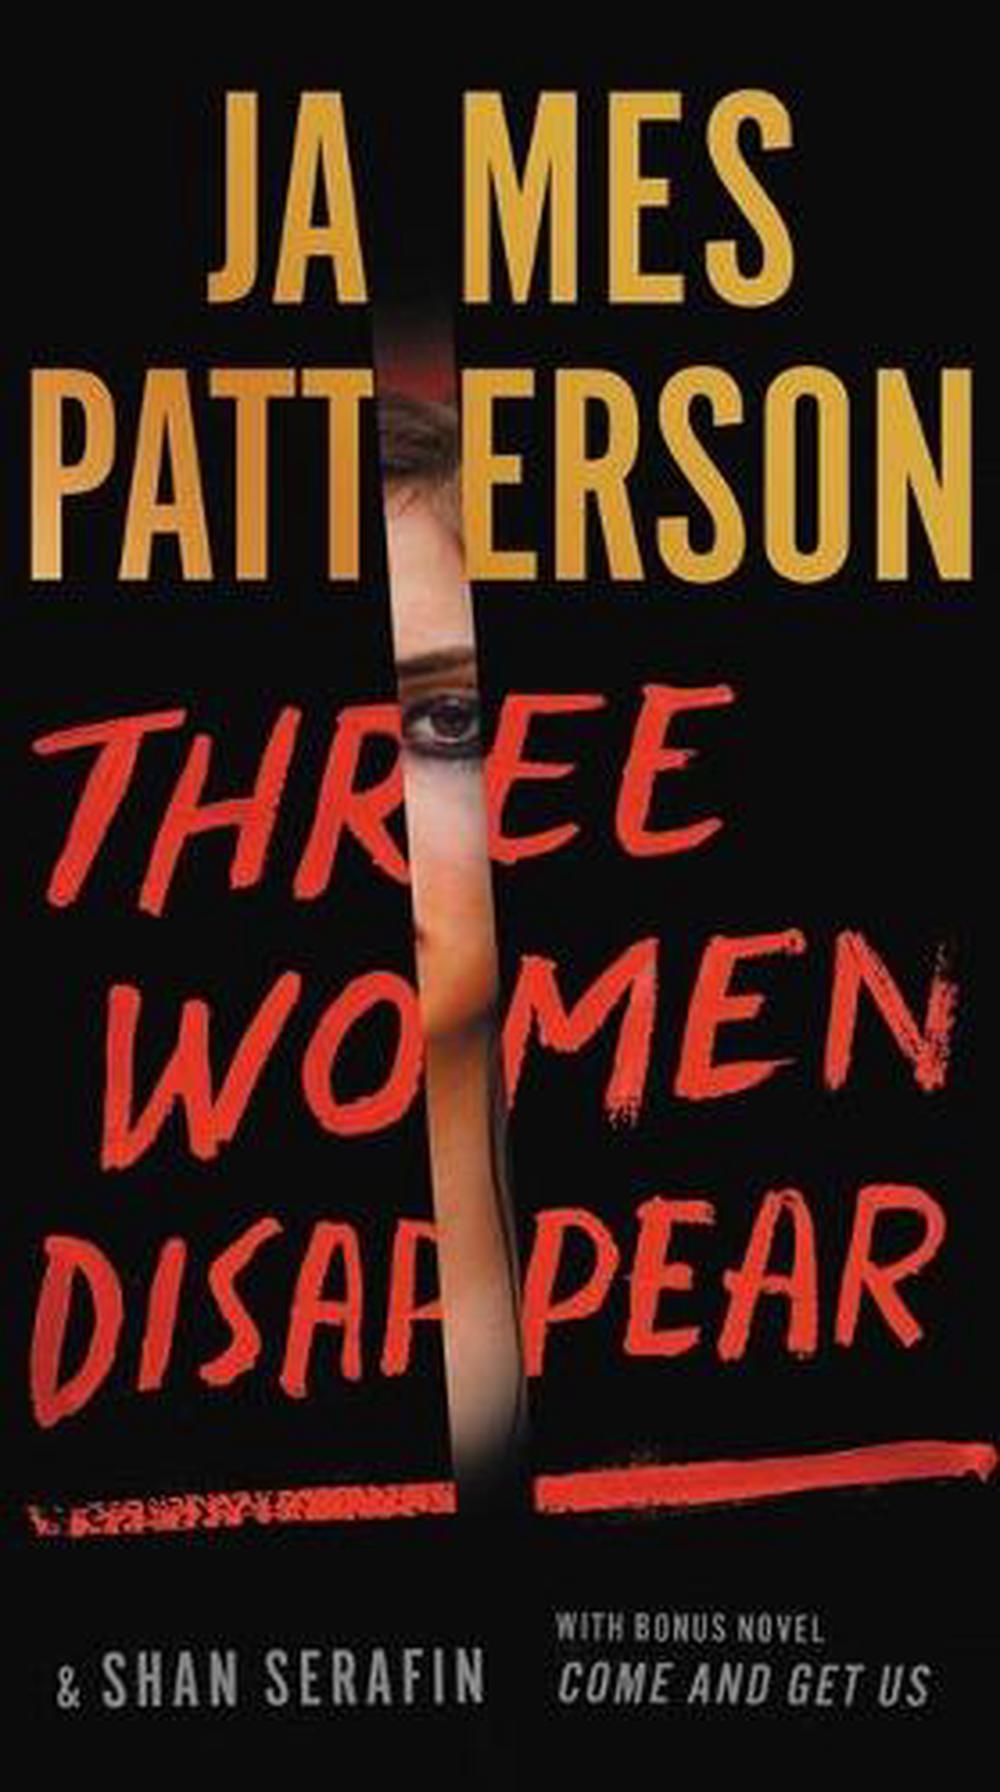 james patterson three women disappear